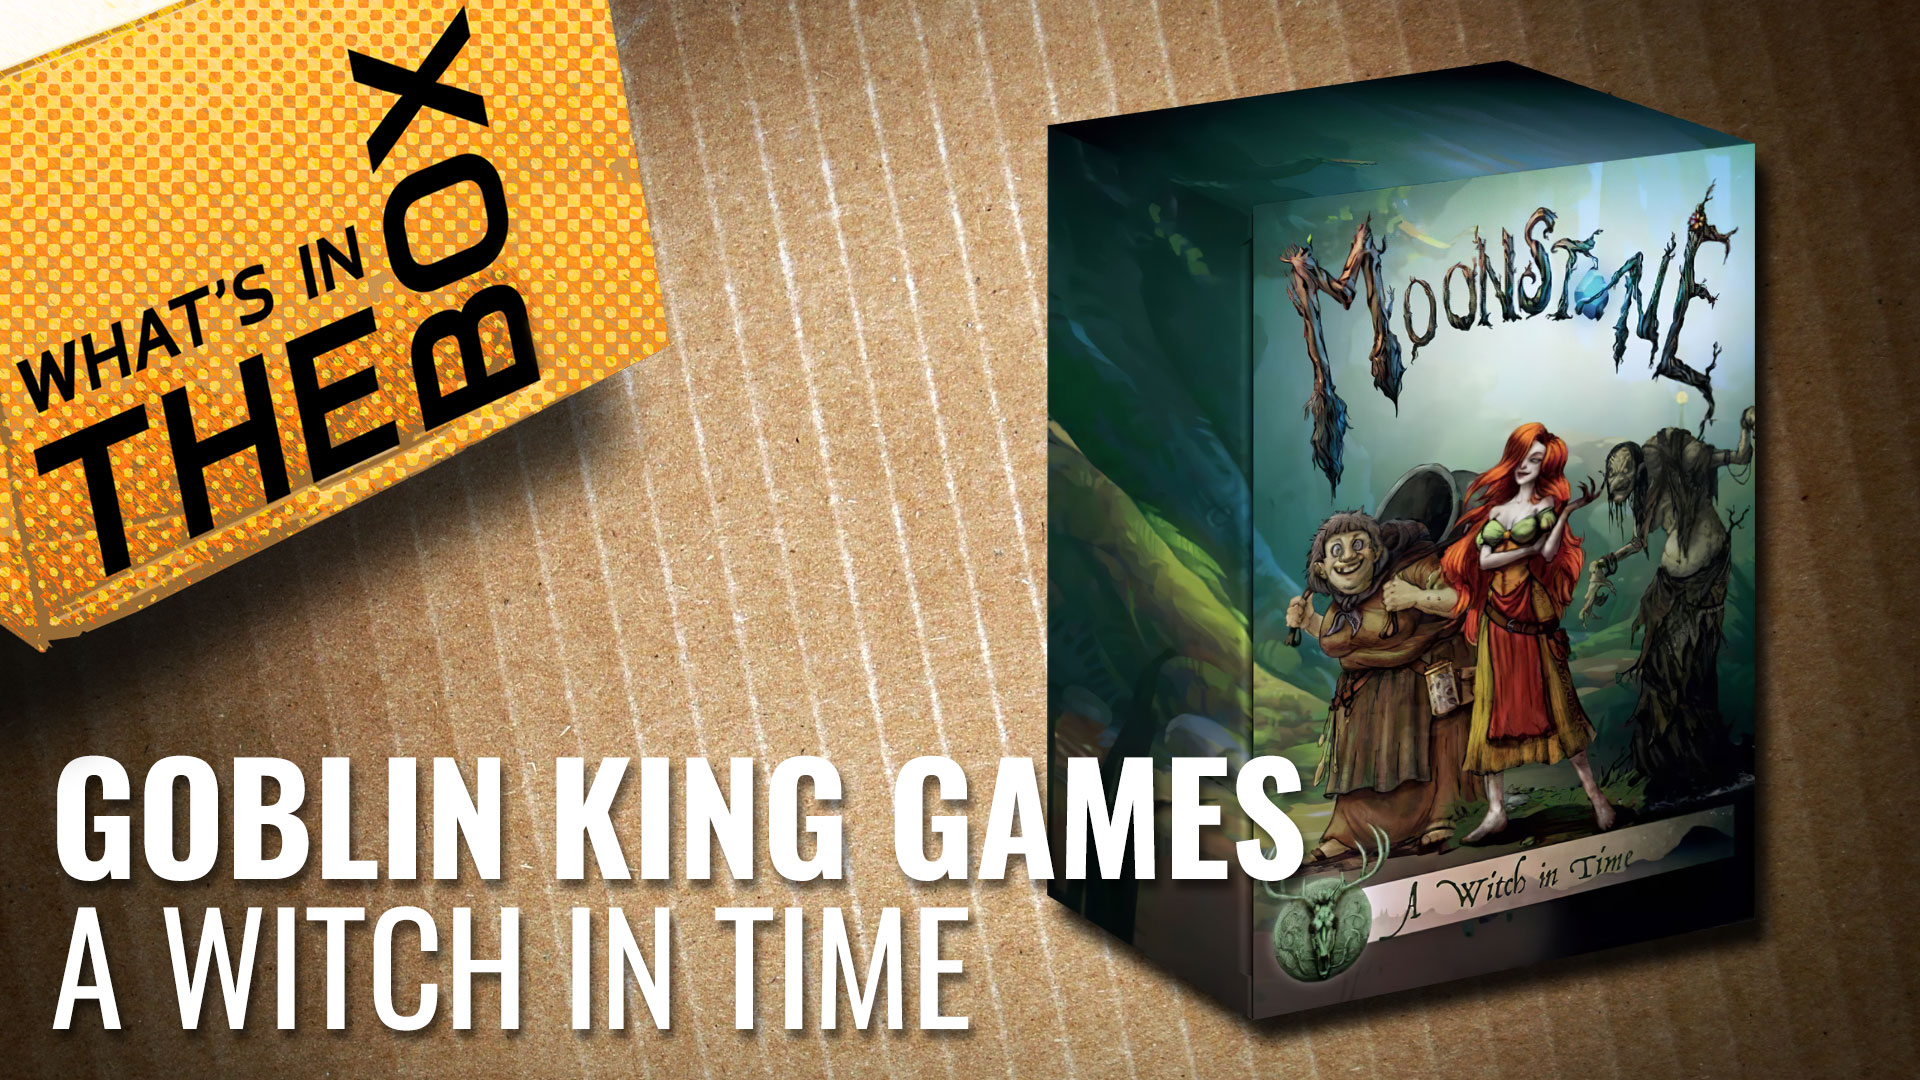 Unboxing-Goblin-King-Games_A-Witch-In-Time-coveriamge